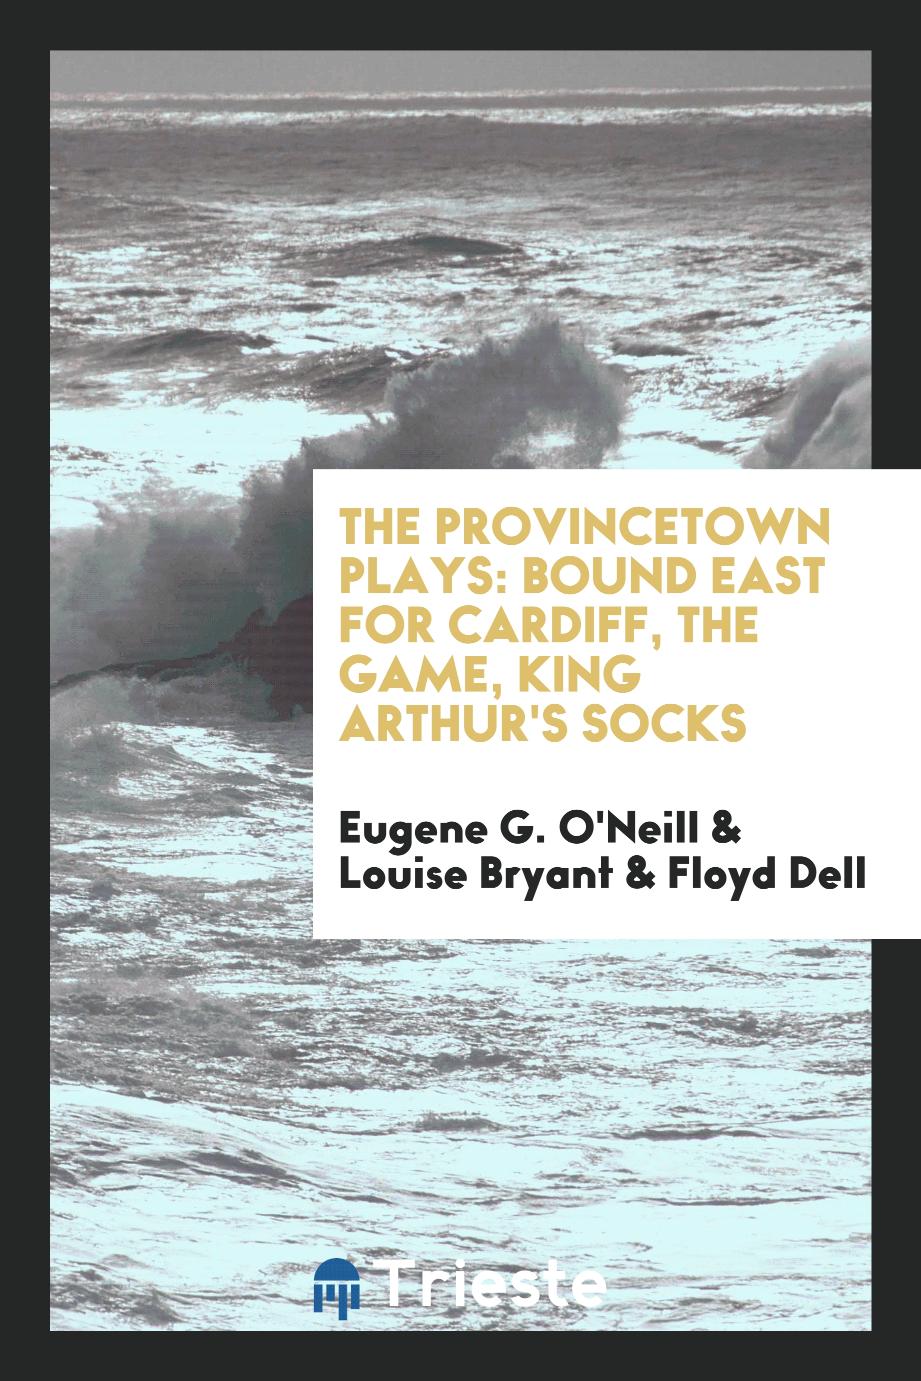 The Provincetown Plays: Bound East for Cardiff, The Game, King Arthur's Socks